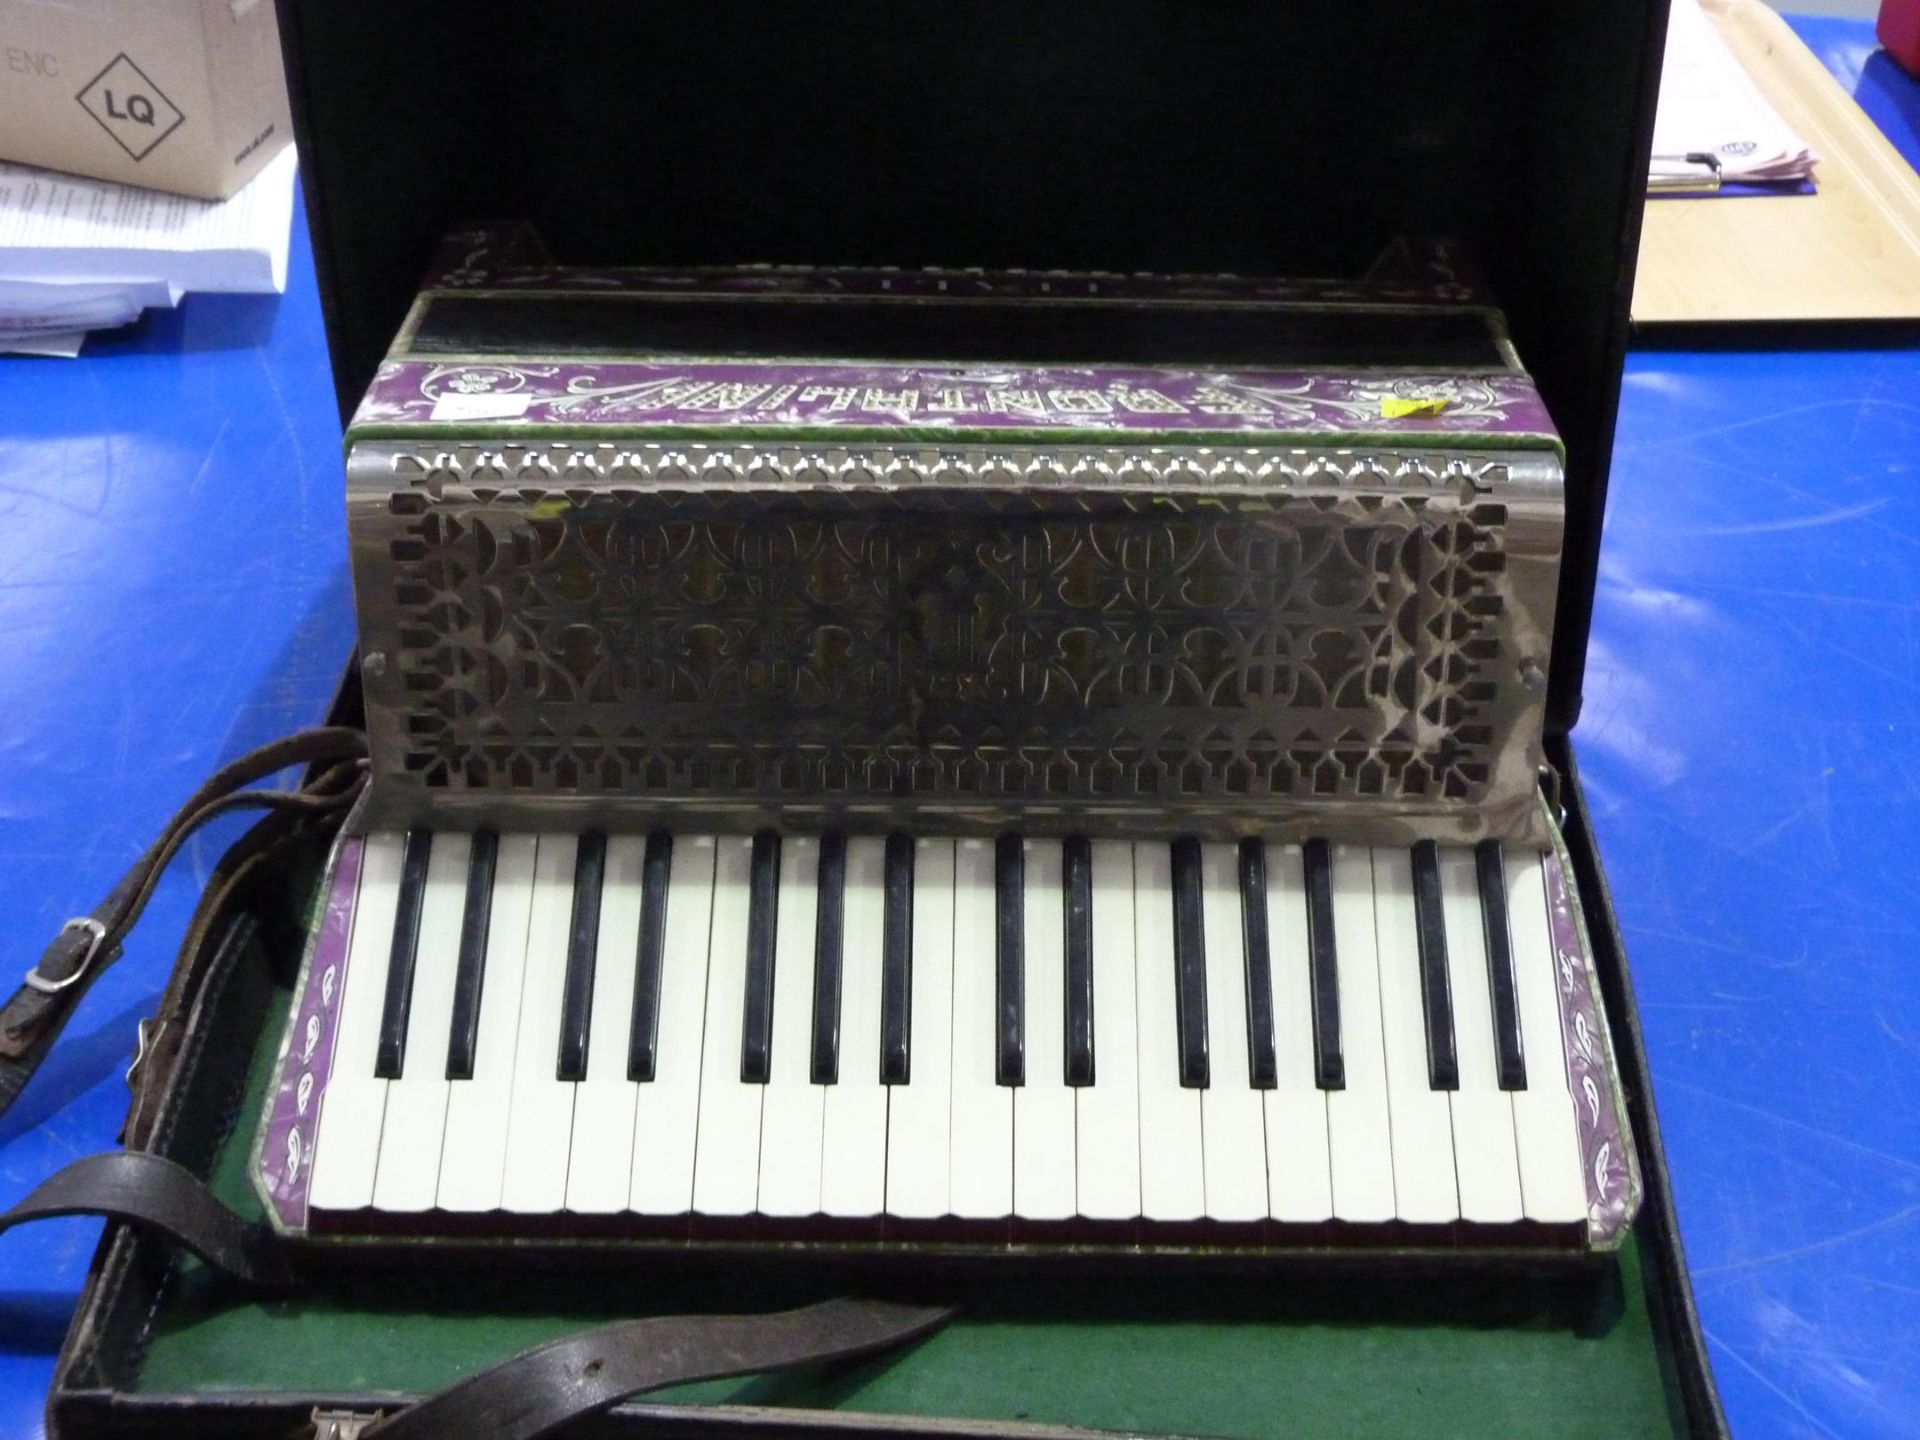 A full size Italia Frontalini Accordian - stamped number 787 in bespoke carry case (est. £50-£100)